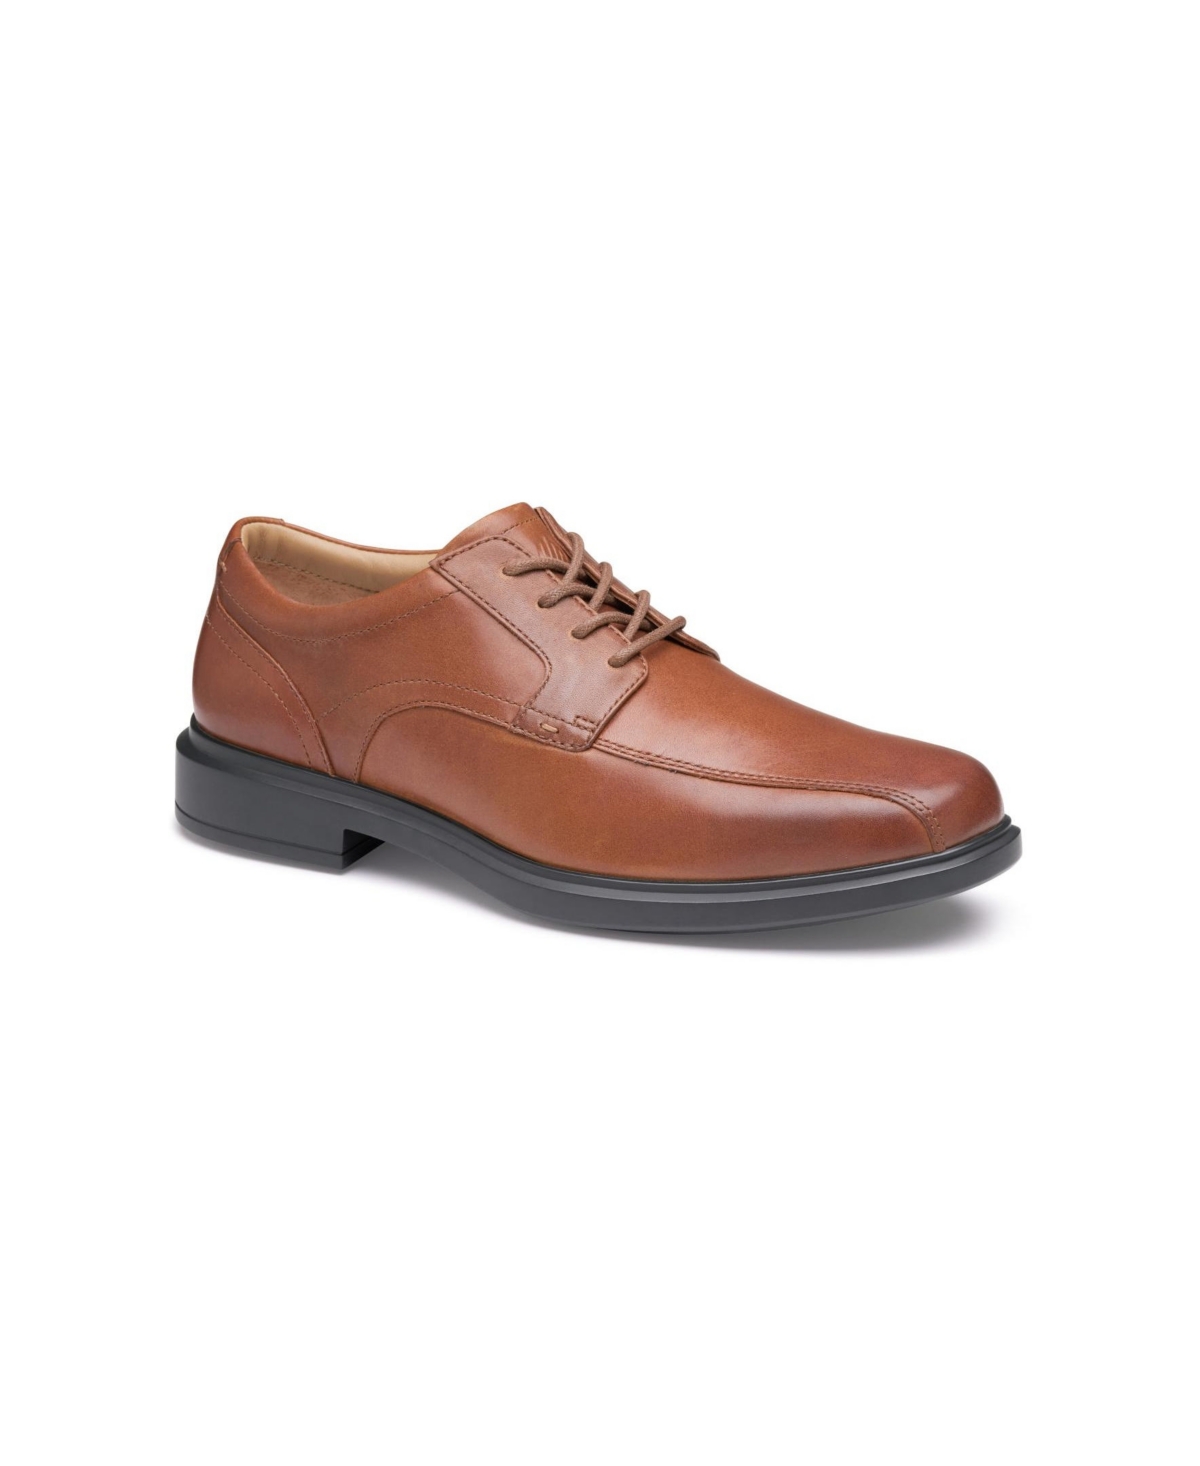 Johnston & Murphy Men's Xc4 Stanton 2.0 Runoff Waterproof Leather Lace-up Oxford Shoes In Tan Full Grain Leather